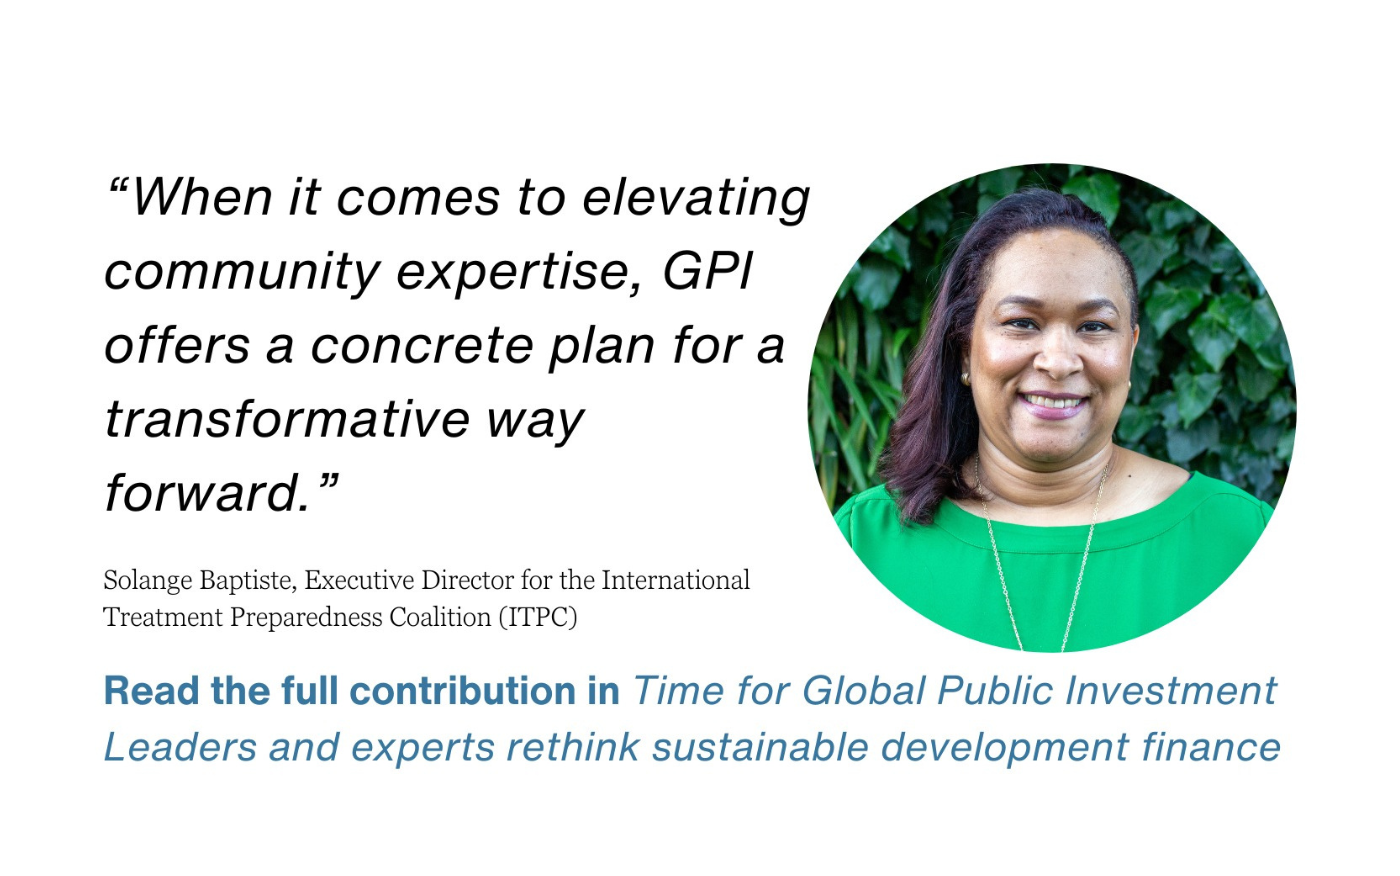 GPI to elevate community expertise in health